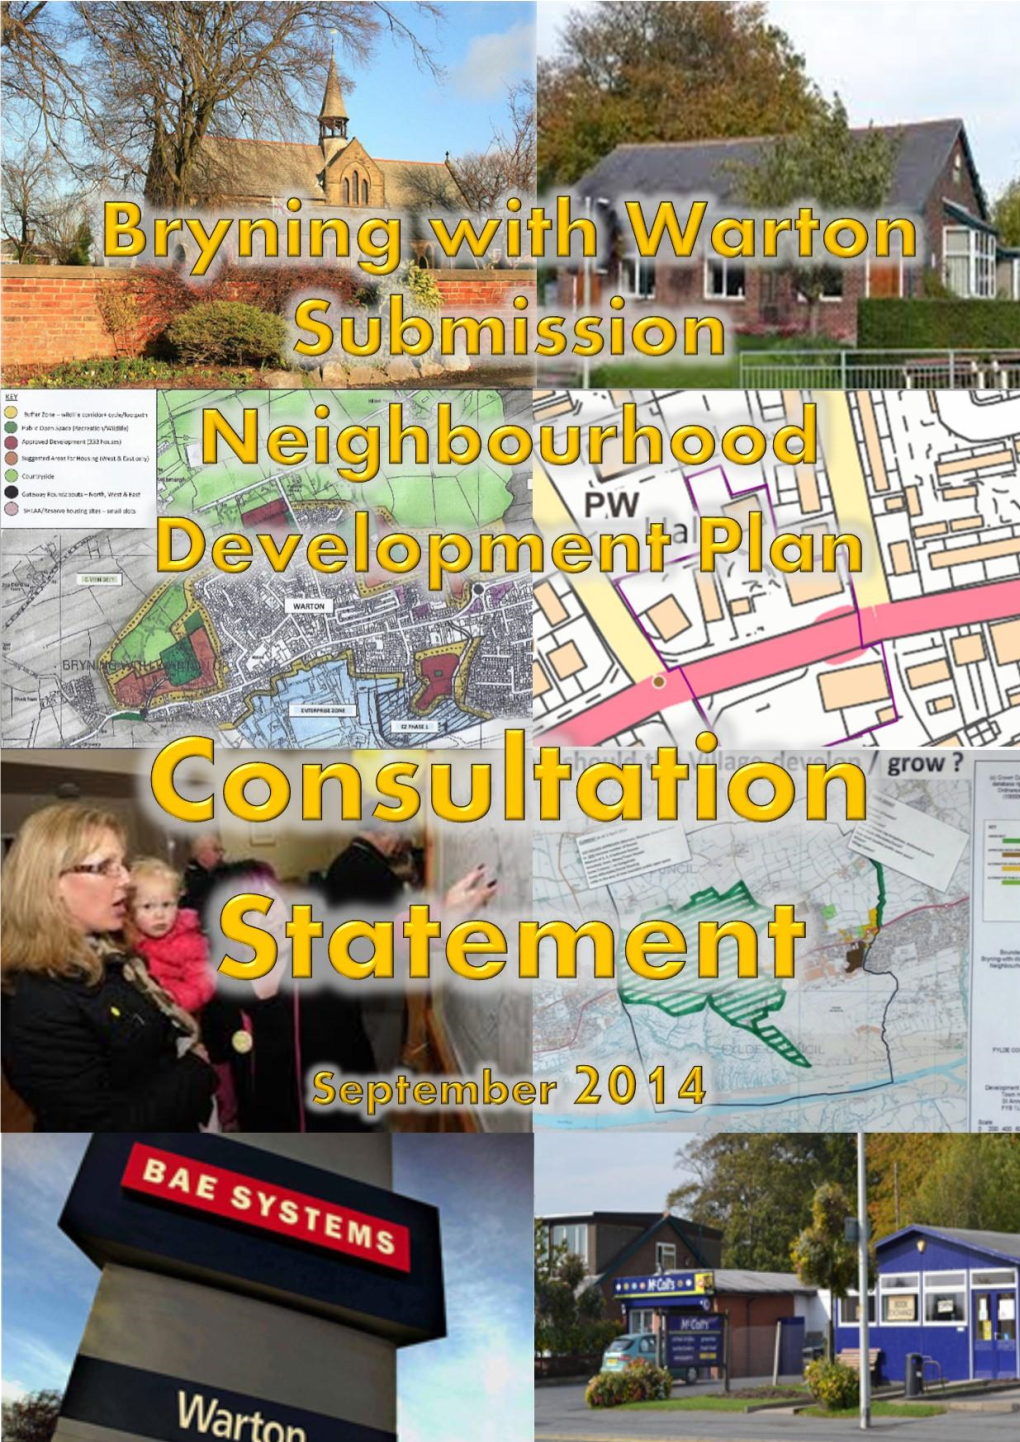 Bryning with Warton Submission Neighbourhood Plan Consultation Statement, September 2014